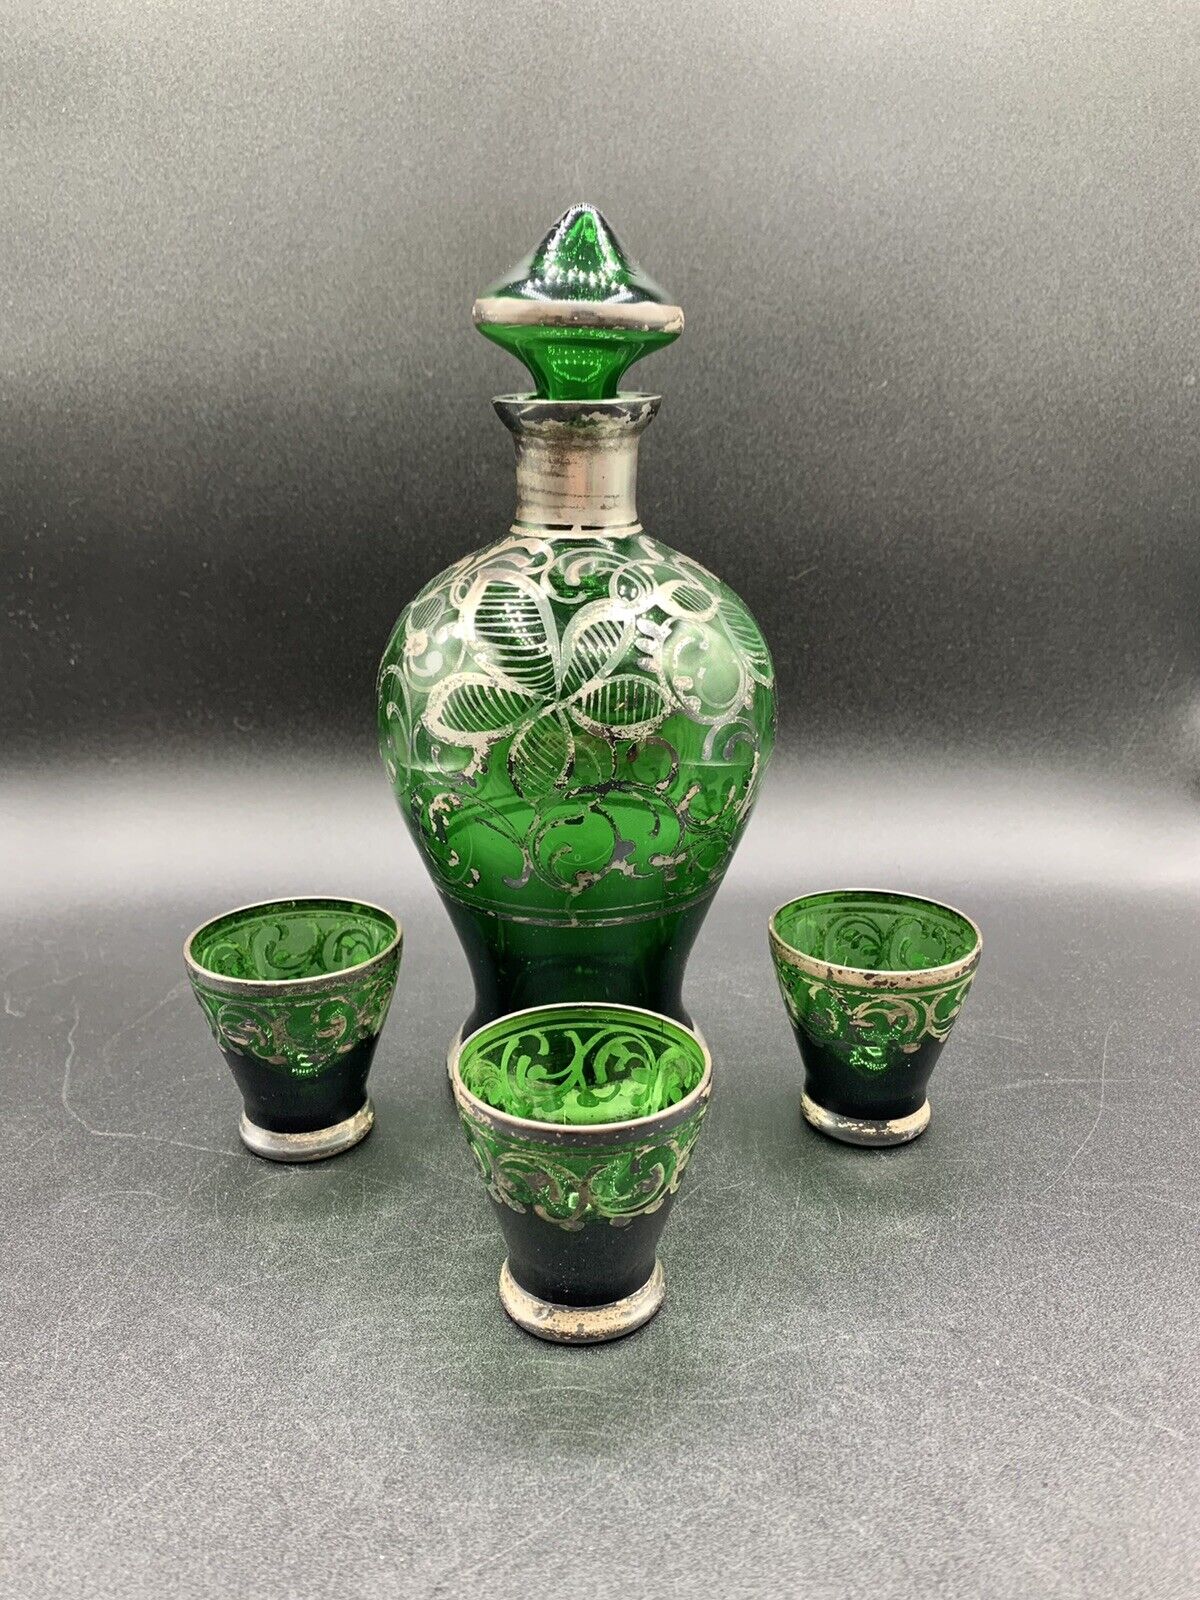 Antique decanter set Green Glass with silver overlay with 3 shot glasses Barware